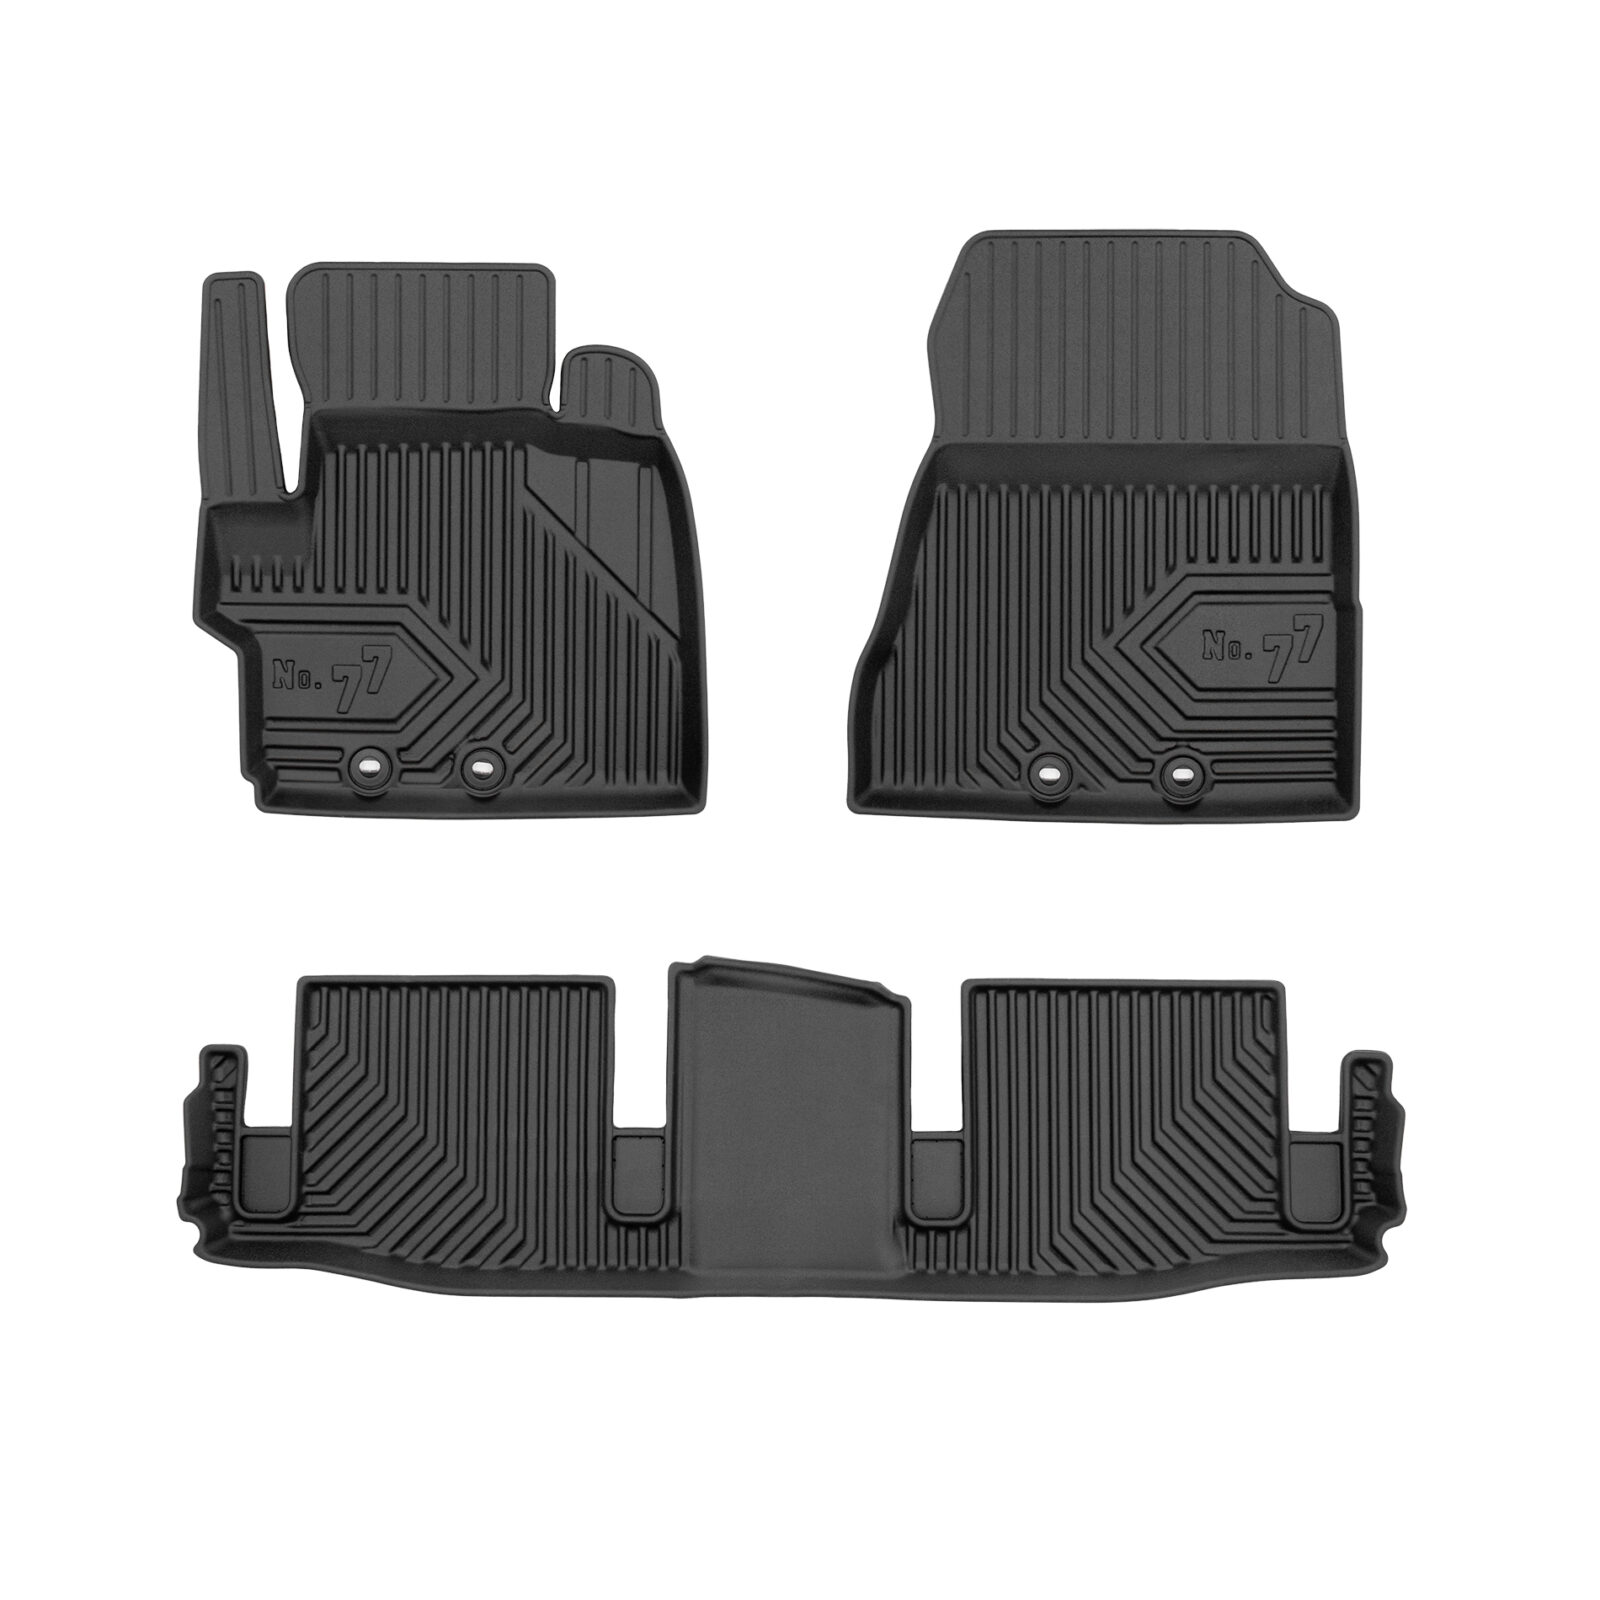 No.77 2008-2015 IQ mats Toyota for Car tailor-made